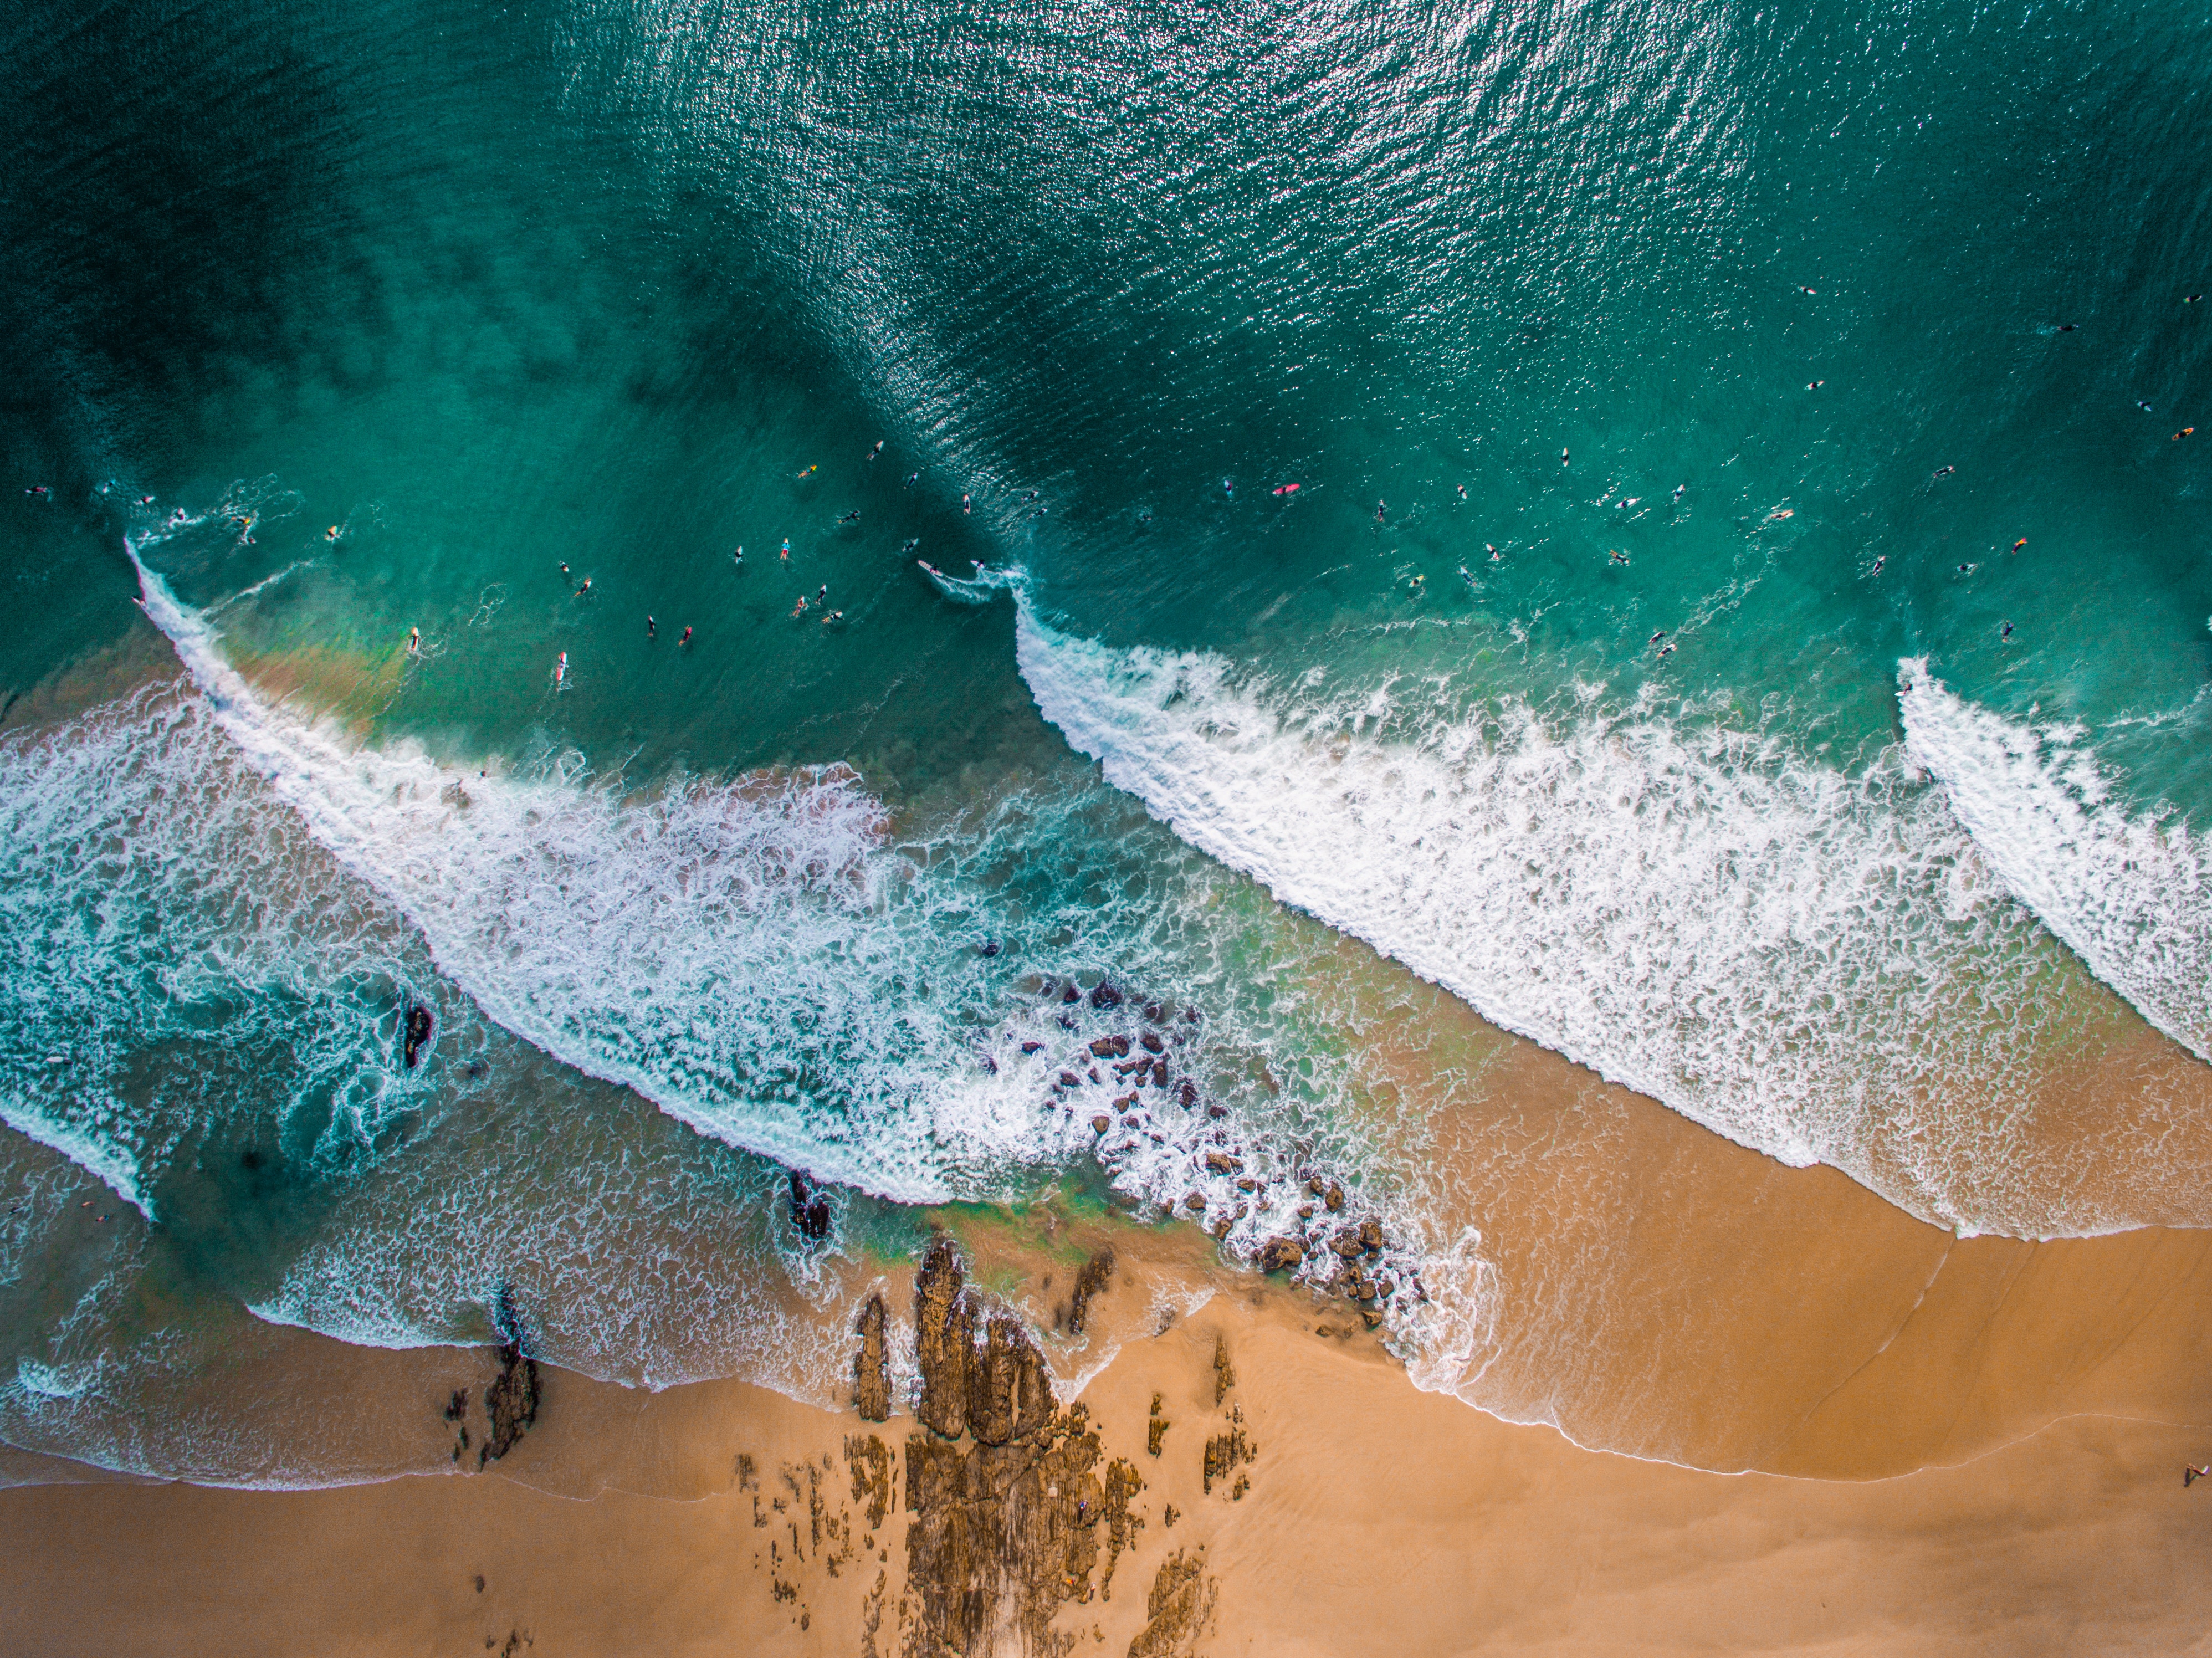 3992x2992 ocean, swimming, sand, wave, wave crashing, wafe, drone, beach, water, people, sandy beach, PNG image, drone view, waves, aerial view, australia, sea, sandy, surfers, surf